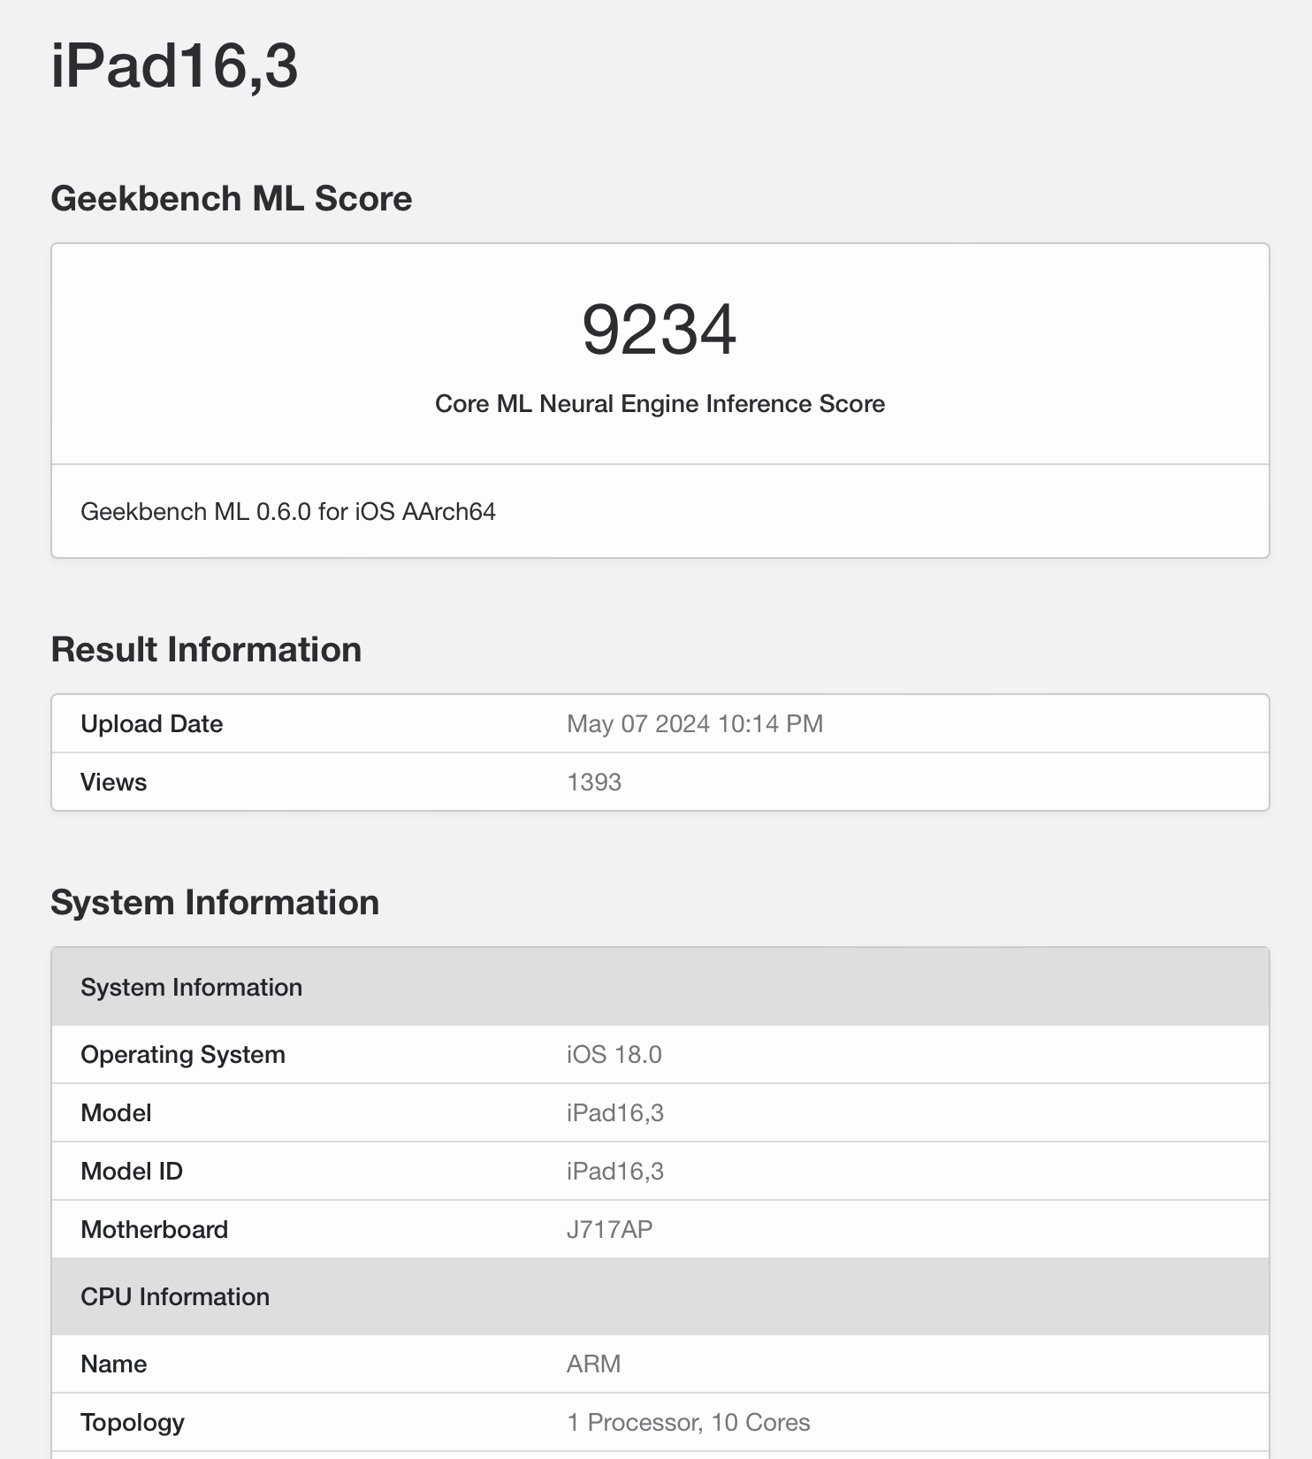 Screenshot showing Geekbench ML Score for iPad16,3 with a score of 9234, upload date, and system details including iOS 18.0 and CPU information.